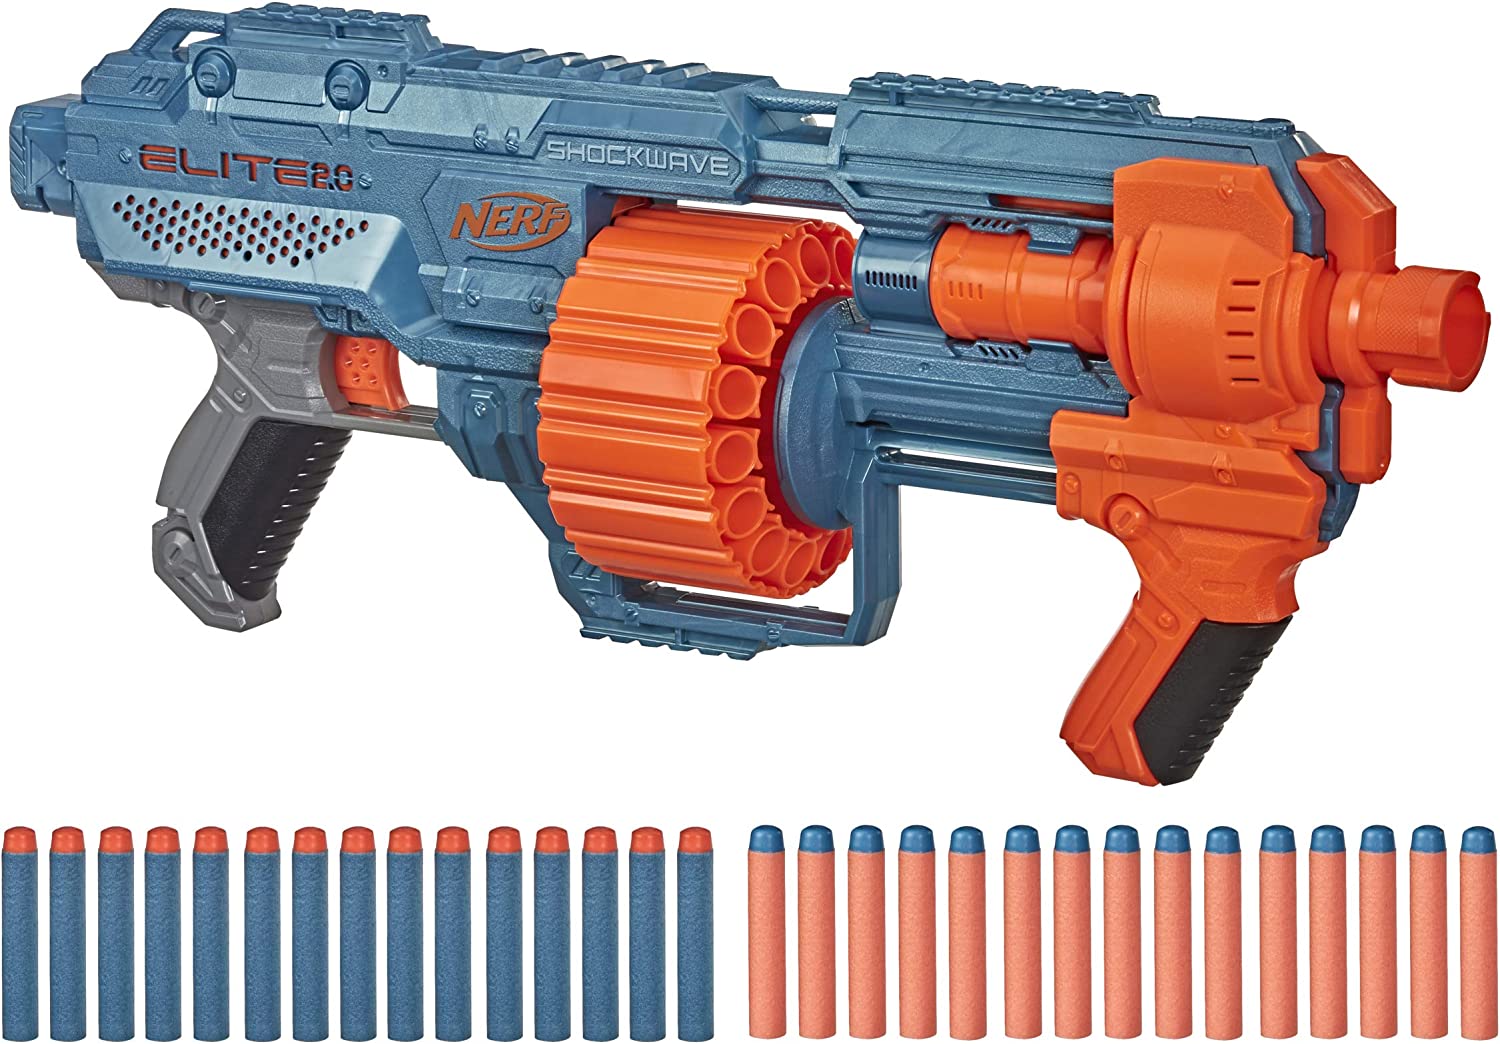 NERF Elite 2.0 Shockwave RD-15 Blaster - with 30 Official Nerf Darts To Fully Load The 15-Dart Rotating Drum And 15 More Darts For Reloading